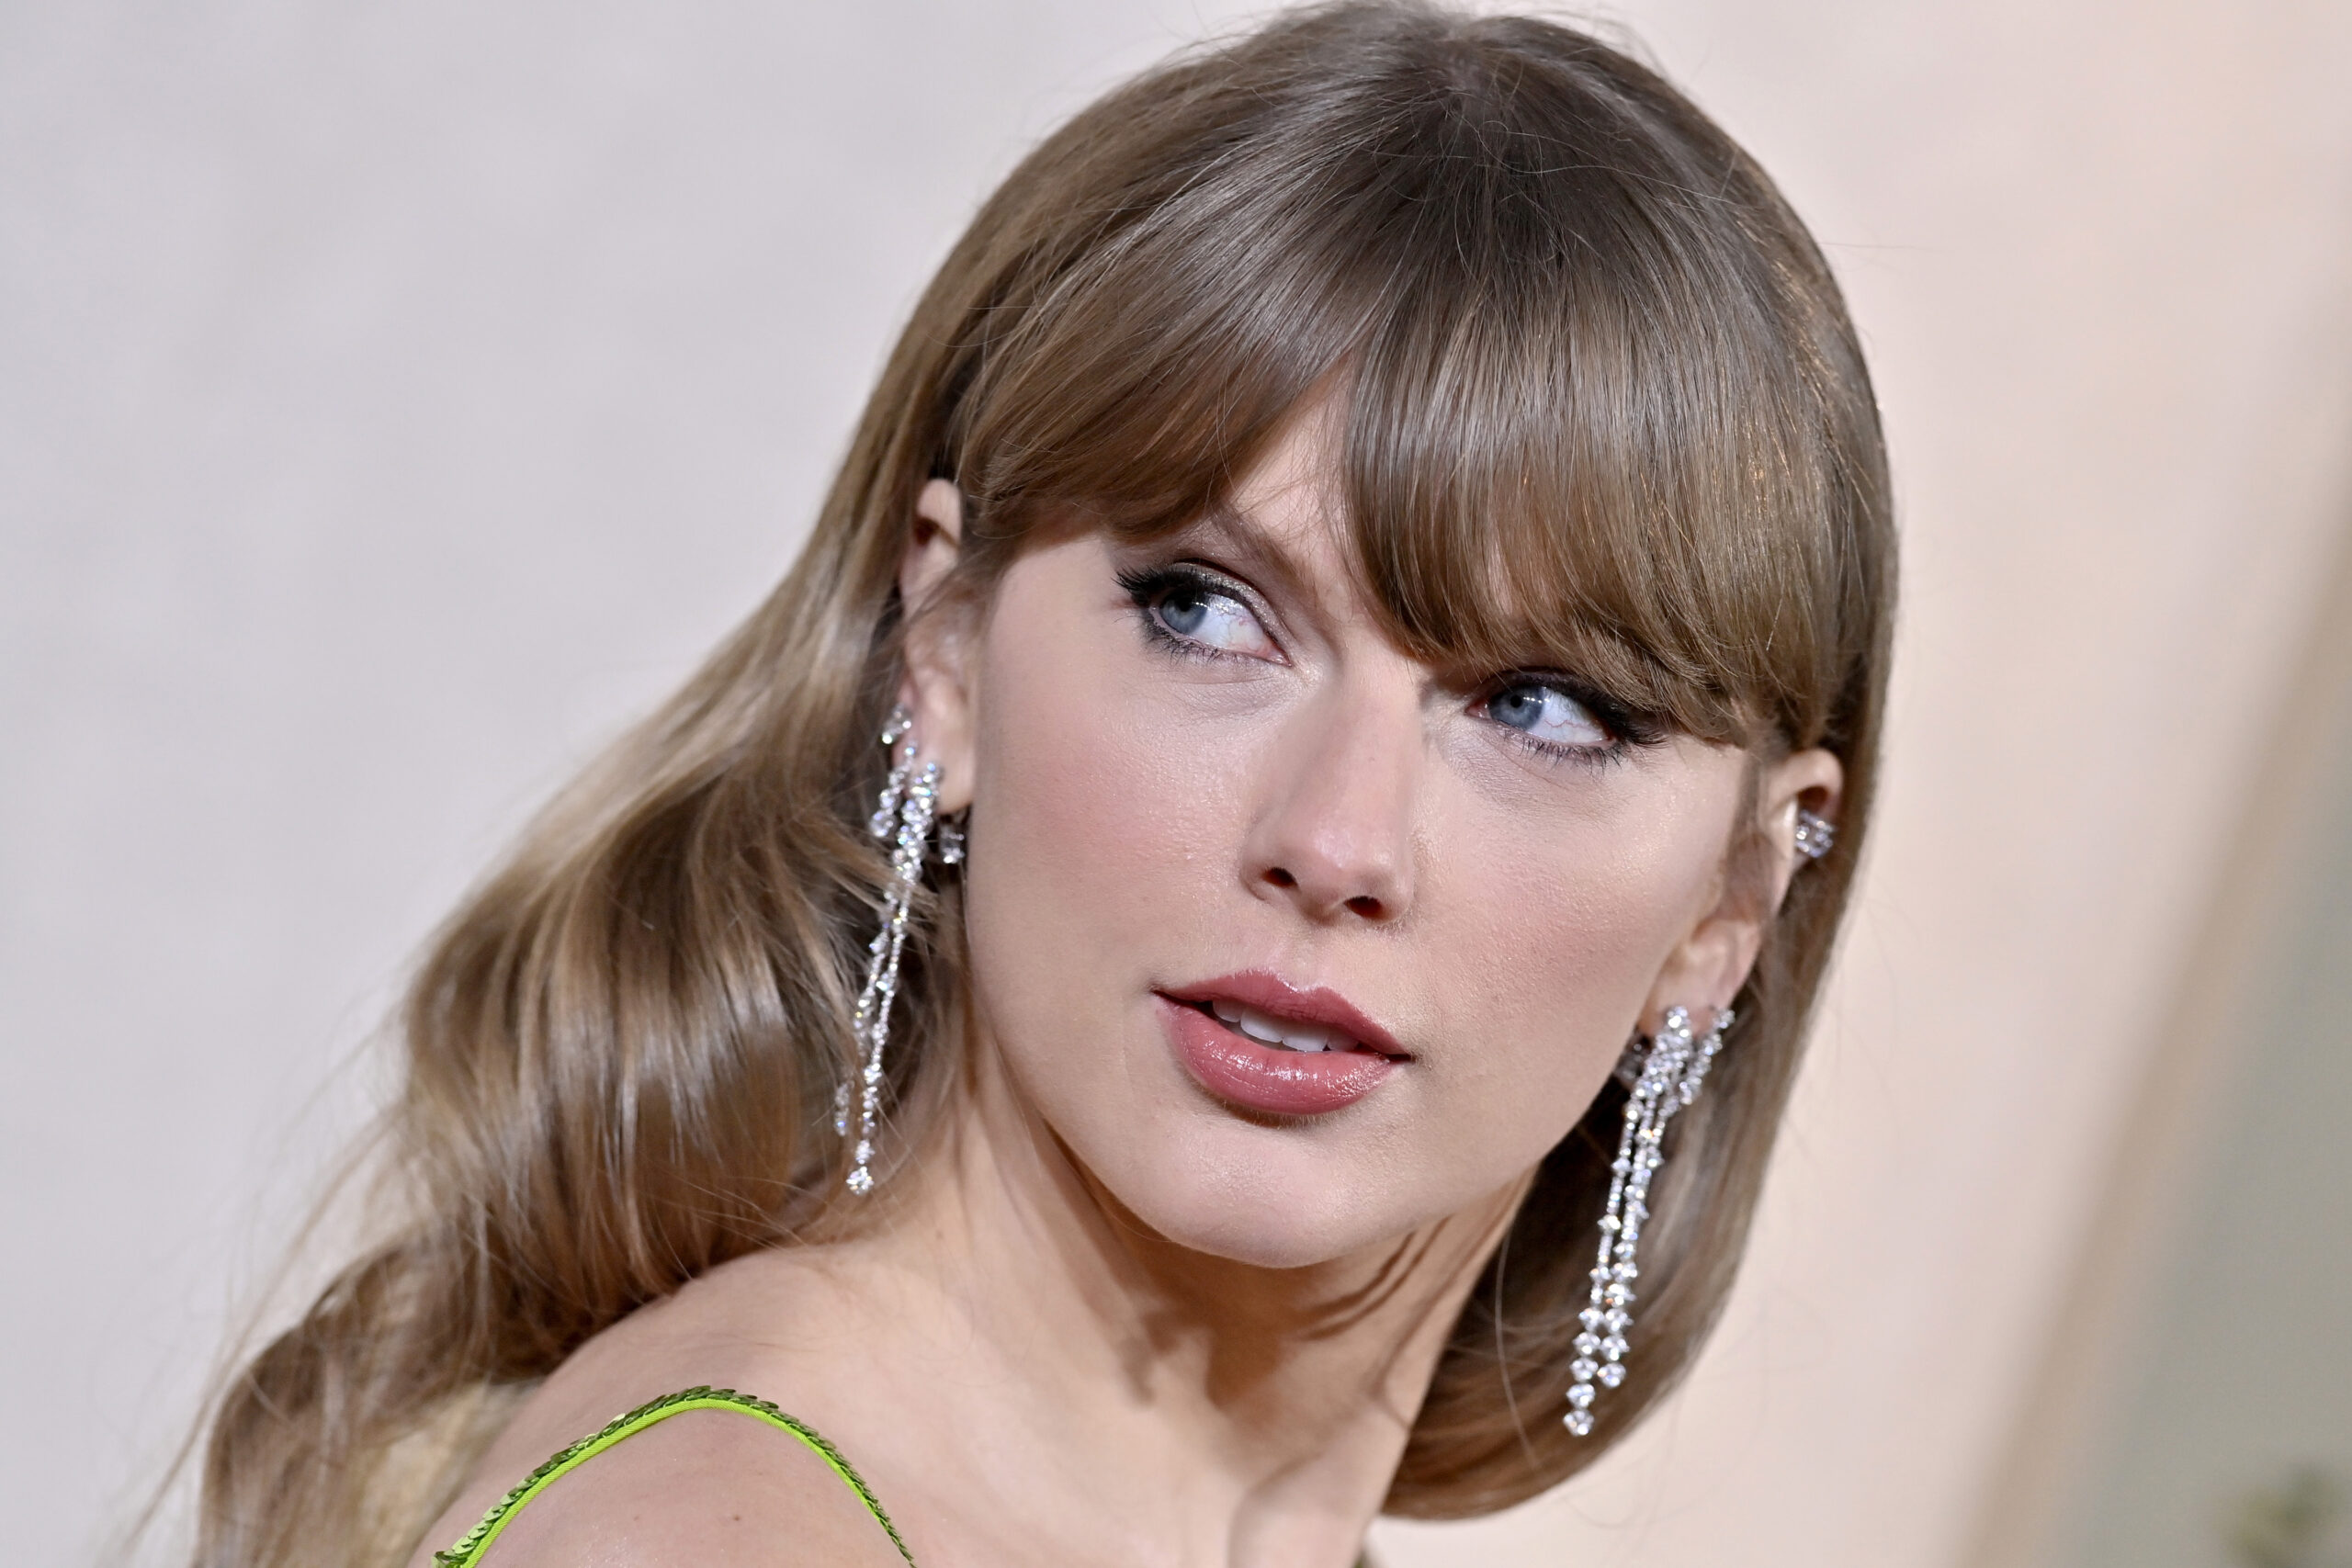 Freddie Freeman randomly photobombed Taylor Swift at the Golden Globes and MLB fans thought it was hilarious